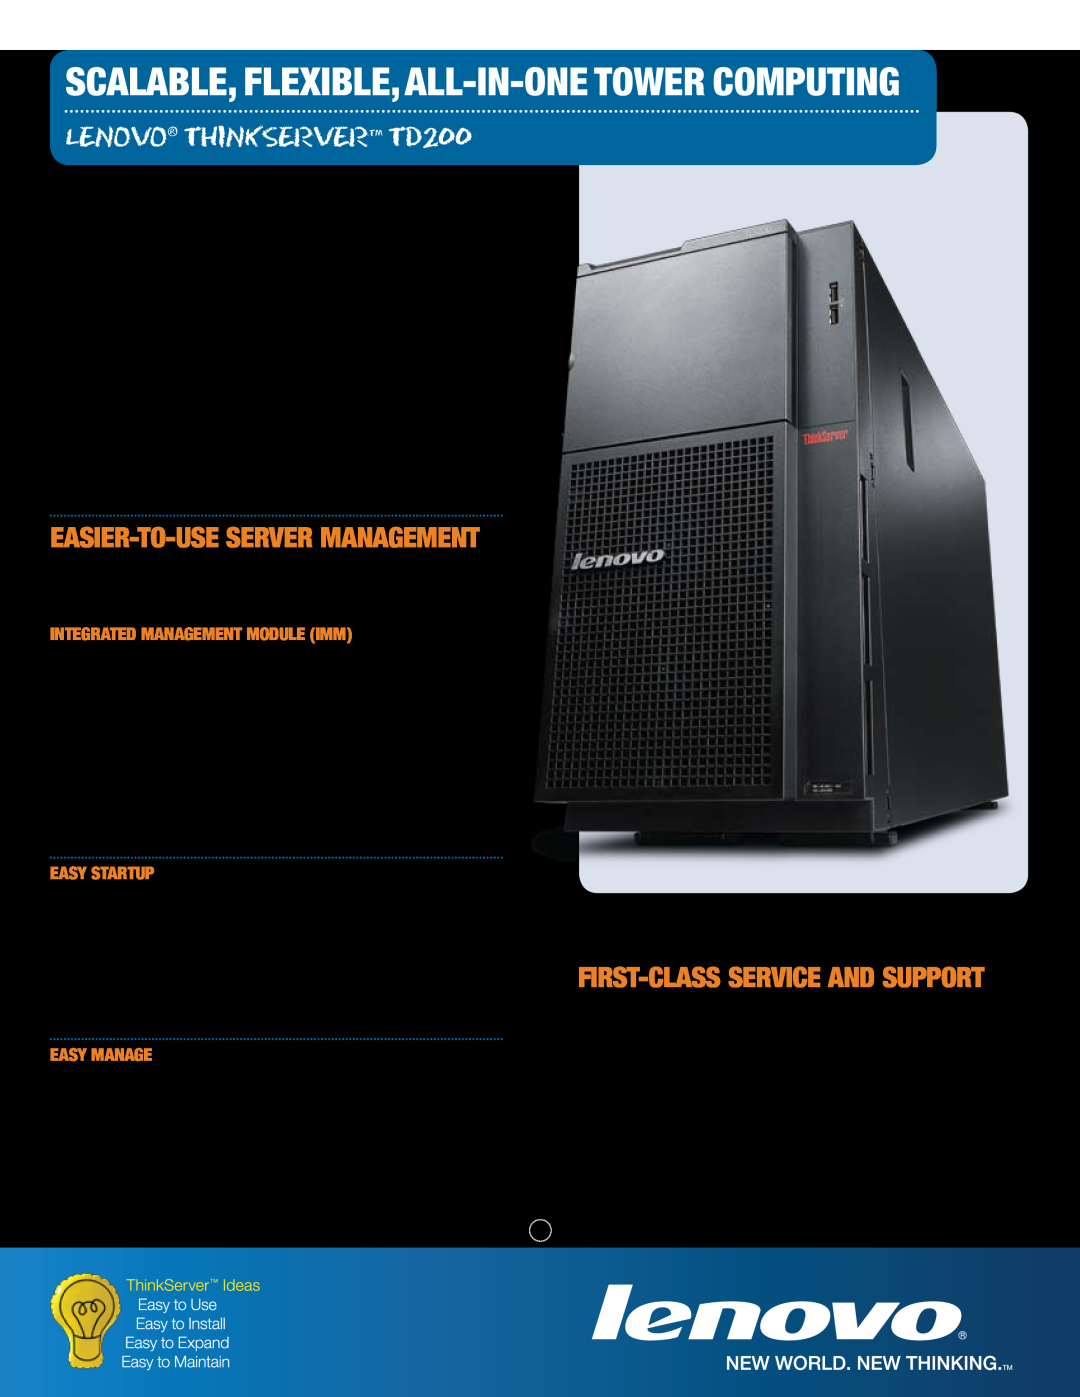 Lenovo TD Scalable, Flexible, All-In-One Tower Computing, Integrated Management Module IMM, Easy Startup, Easy Manage 